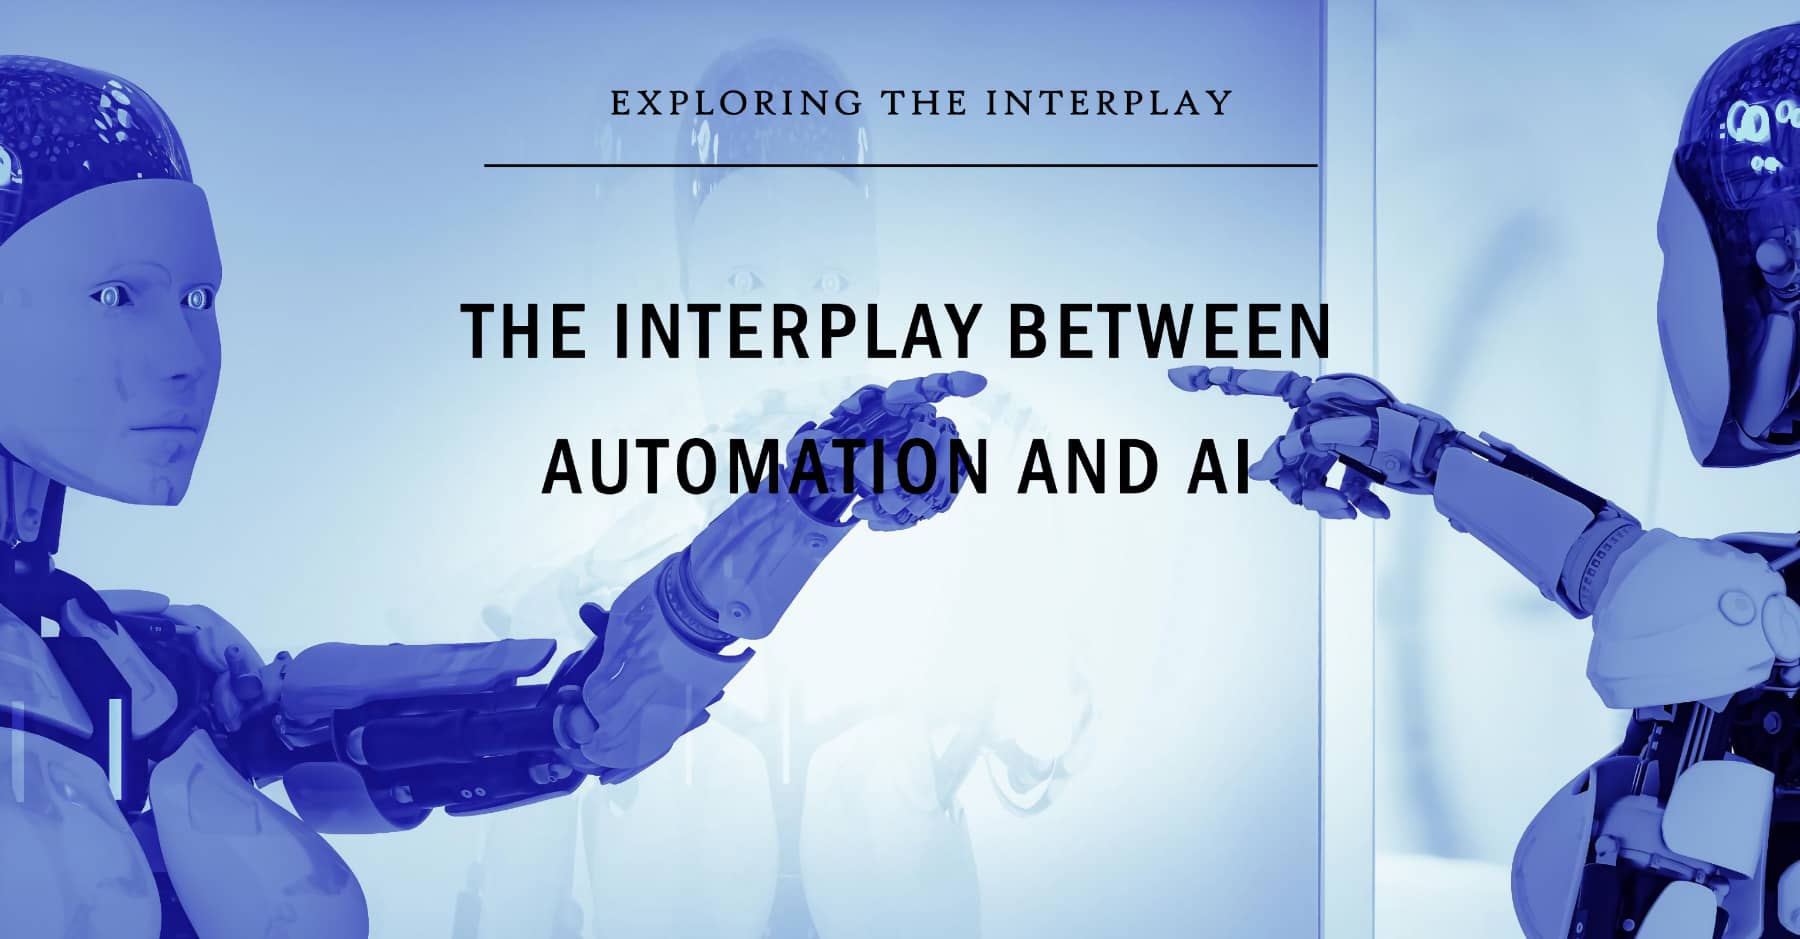 The Interplay Between Automation and AI